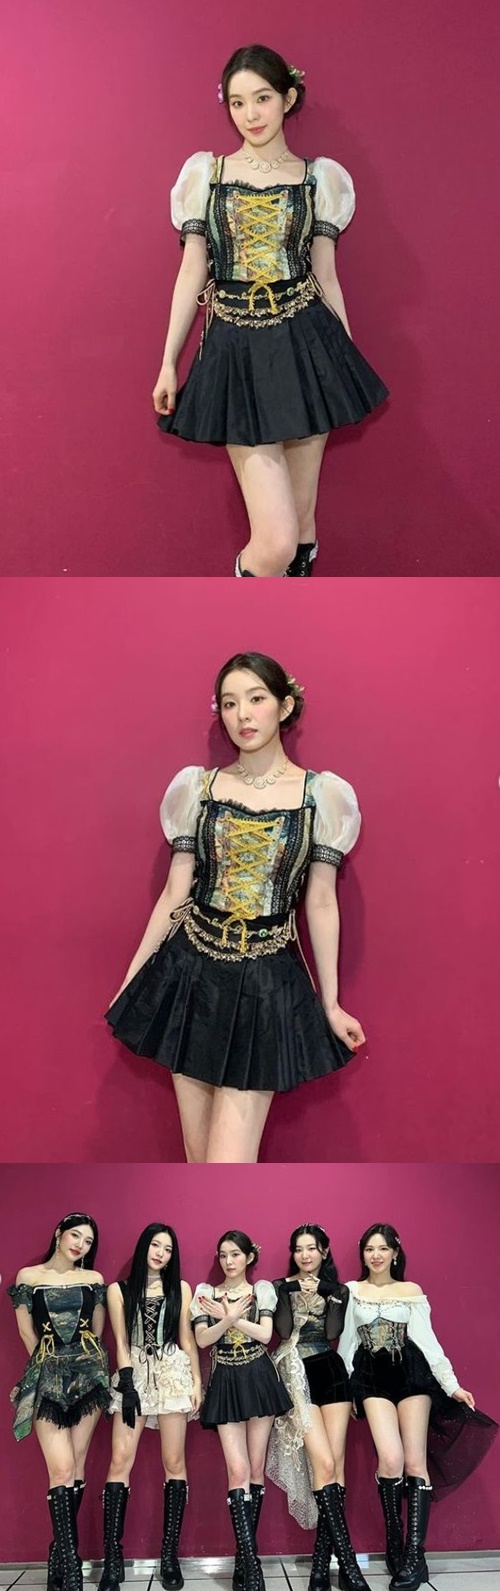 Group Red Velvet member Irene showed off her doll-like visuals.On the 26th, Irene posted several photos on her instagram with various emoticons.Irene created a princess in the cartoon with a doll-like figure.Dressed in stage costumes for filming, he robbed fans of their eyes with shining idol visuals.The sleek jawline and flawless skin maximized Irenes purity.On the other hand, Red Velvet, which Irene belongs to, released a new Mini album The Reve Festival 2022 - The Reve Festival 2022 - Feel My Rhythm on the 21st and made a comeback.